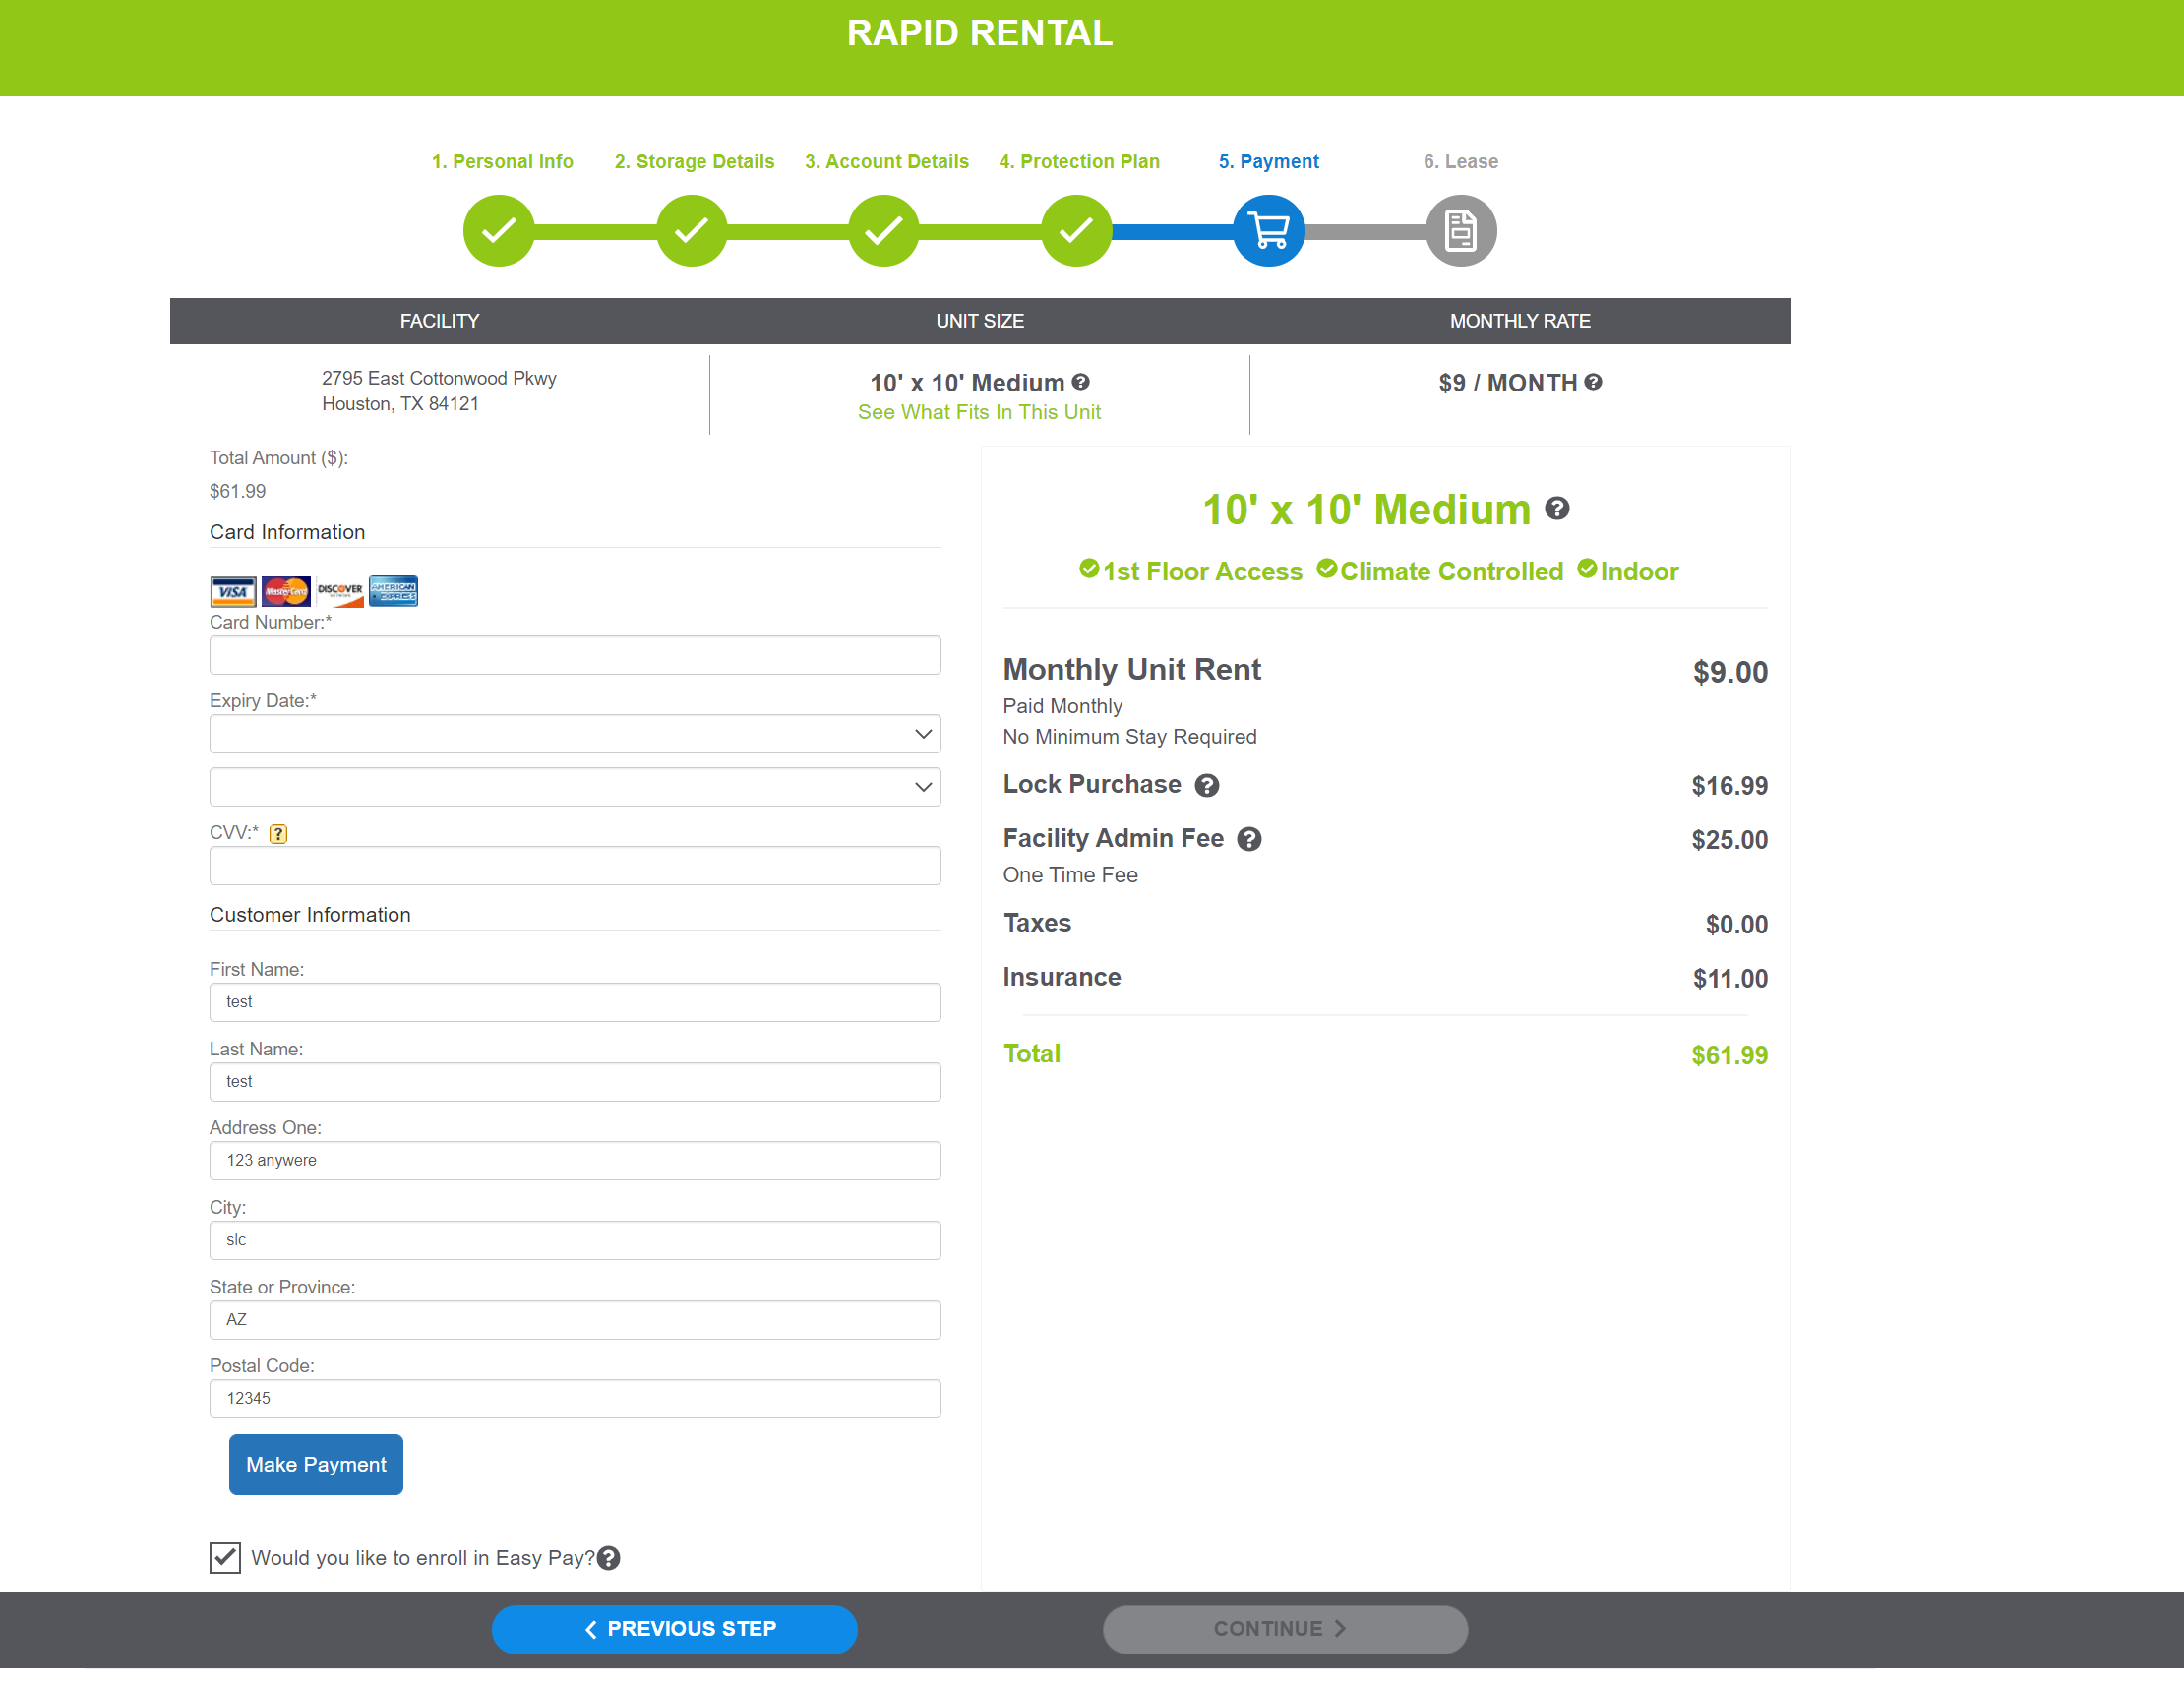 Screen shot of website portal with payment section filled in.